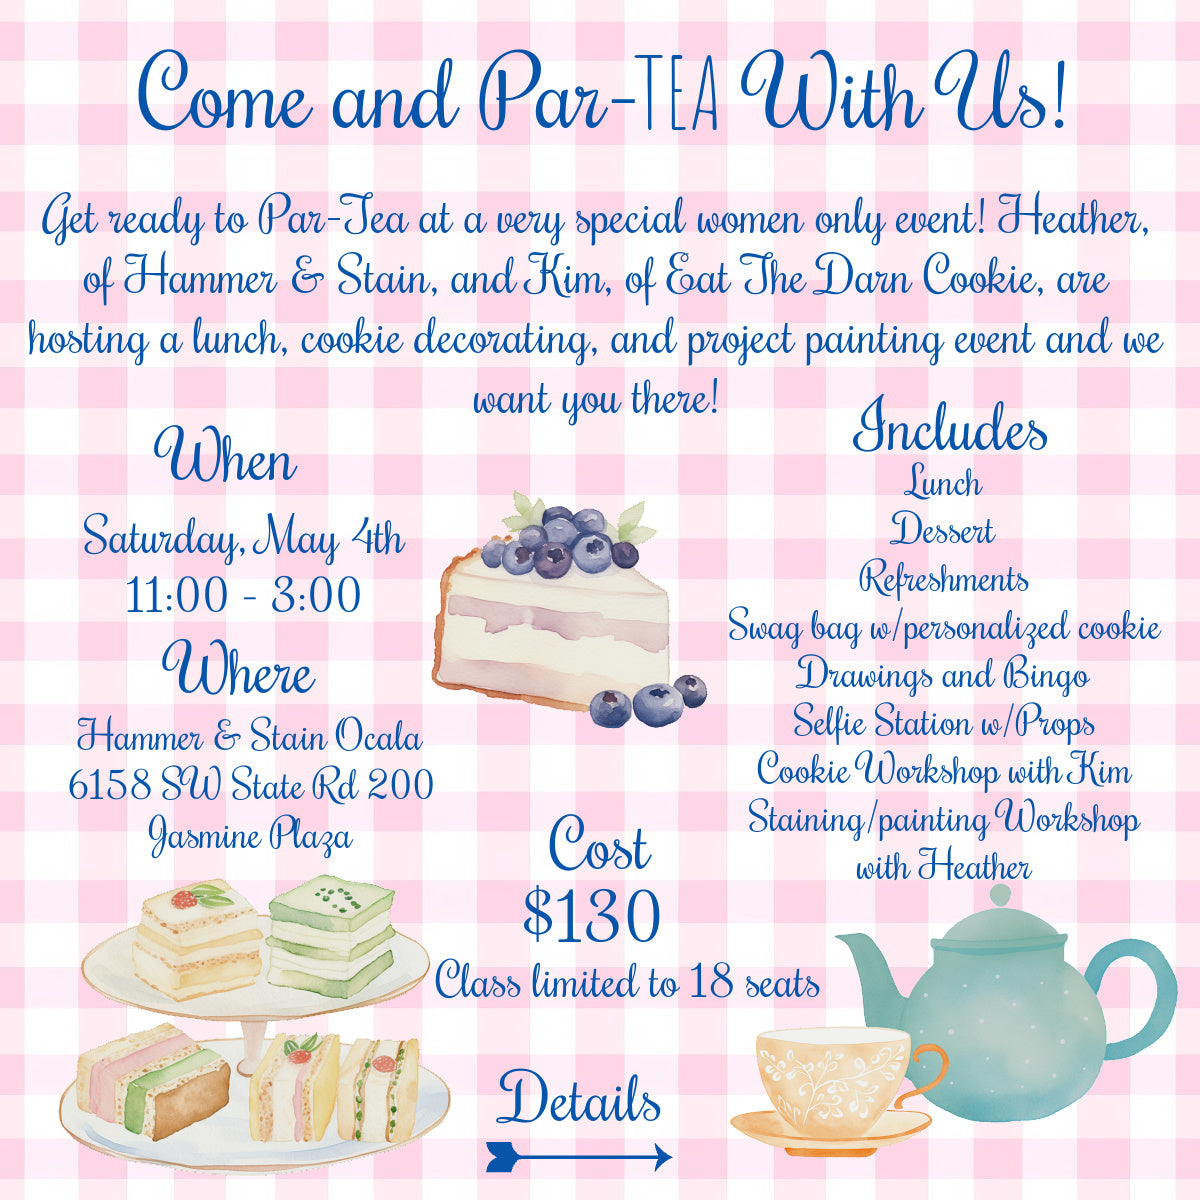 HIGH TEA WOMENS COOKIE EVENT- SAT MAY 4TH 11AM